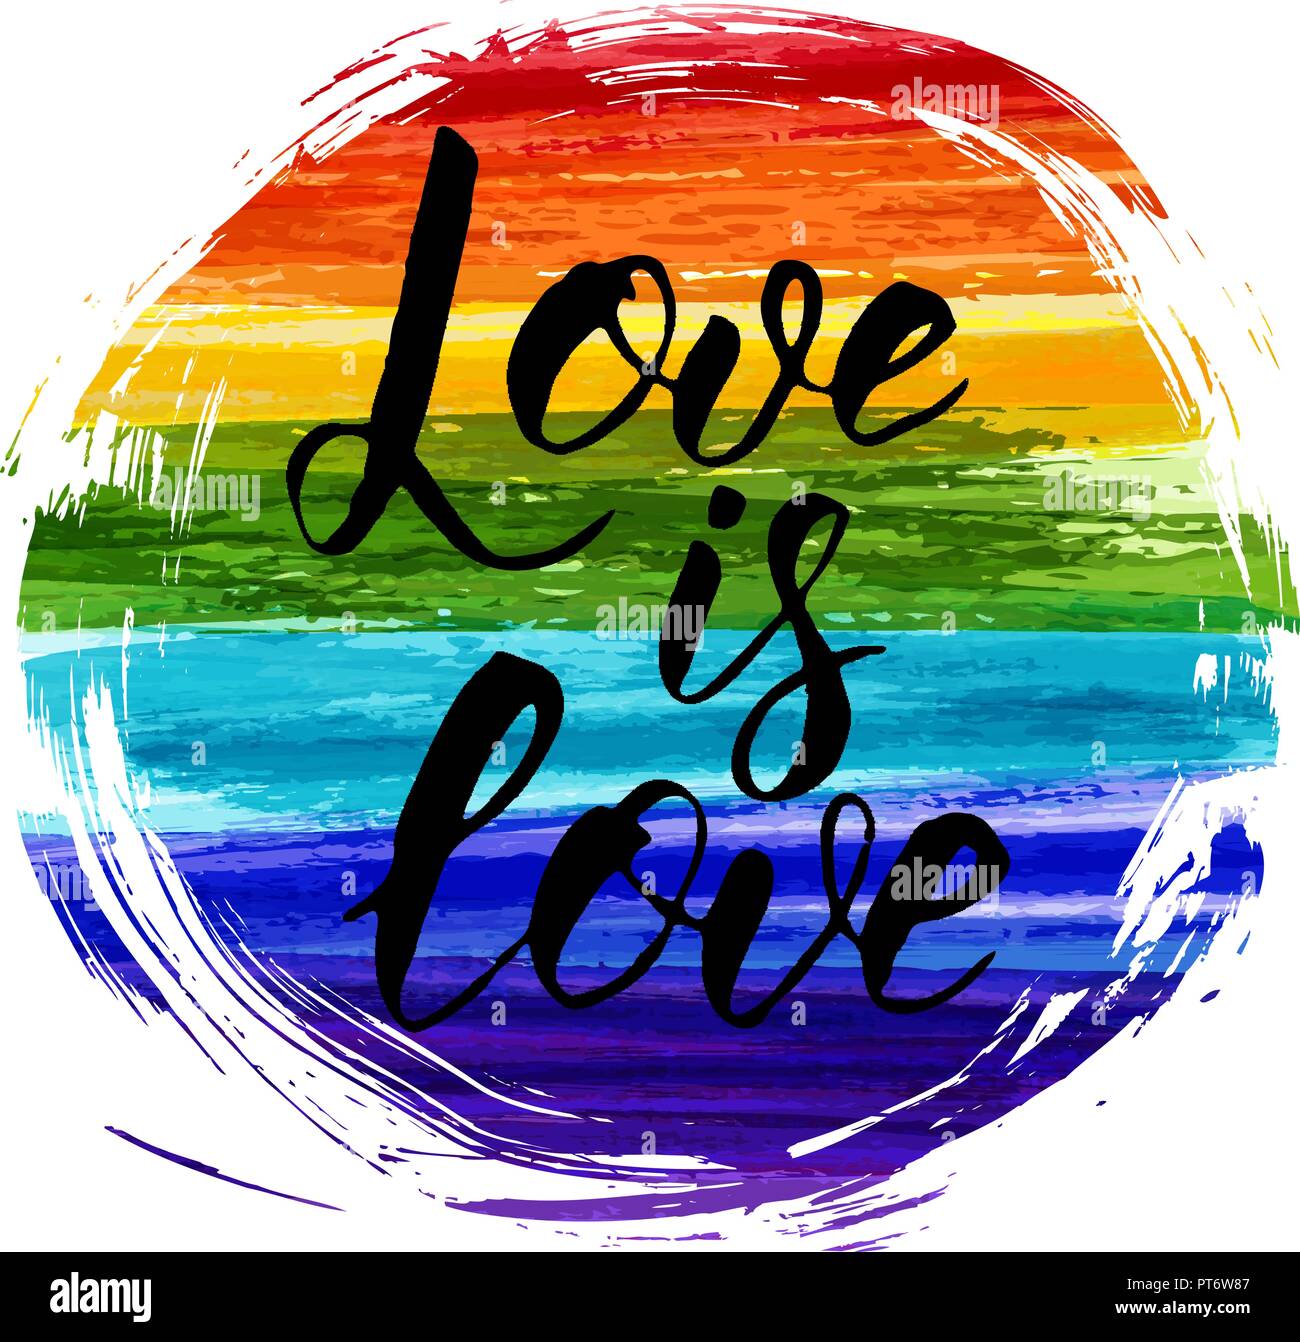 Love is love - handwritten modern calligraphy lettering. Grunge watercolor imitation lines in rainbow colors. Grunge round shape. Gay pride symbol. LG Stock Vector